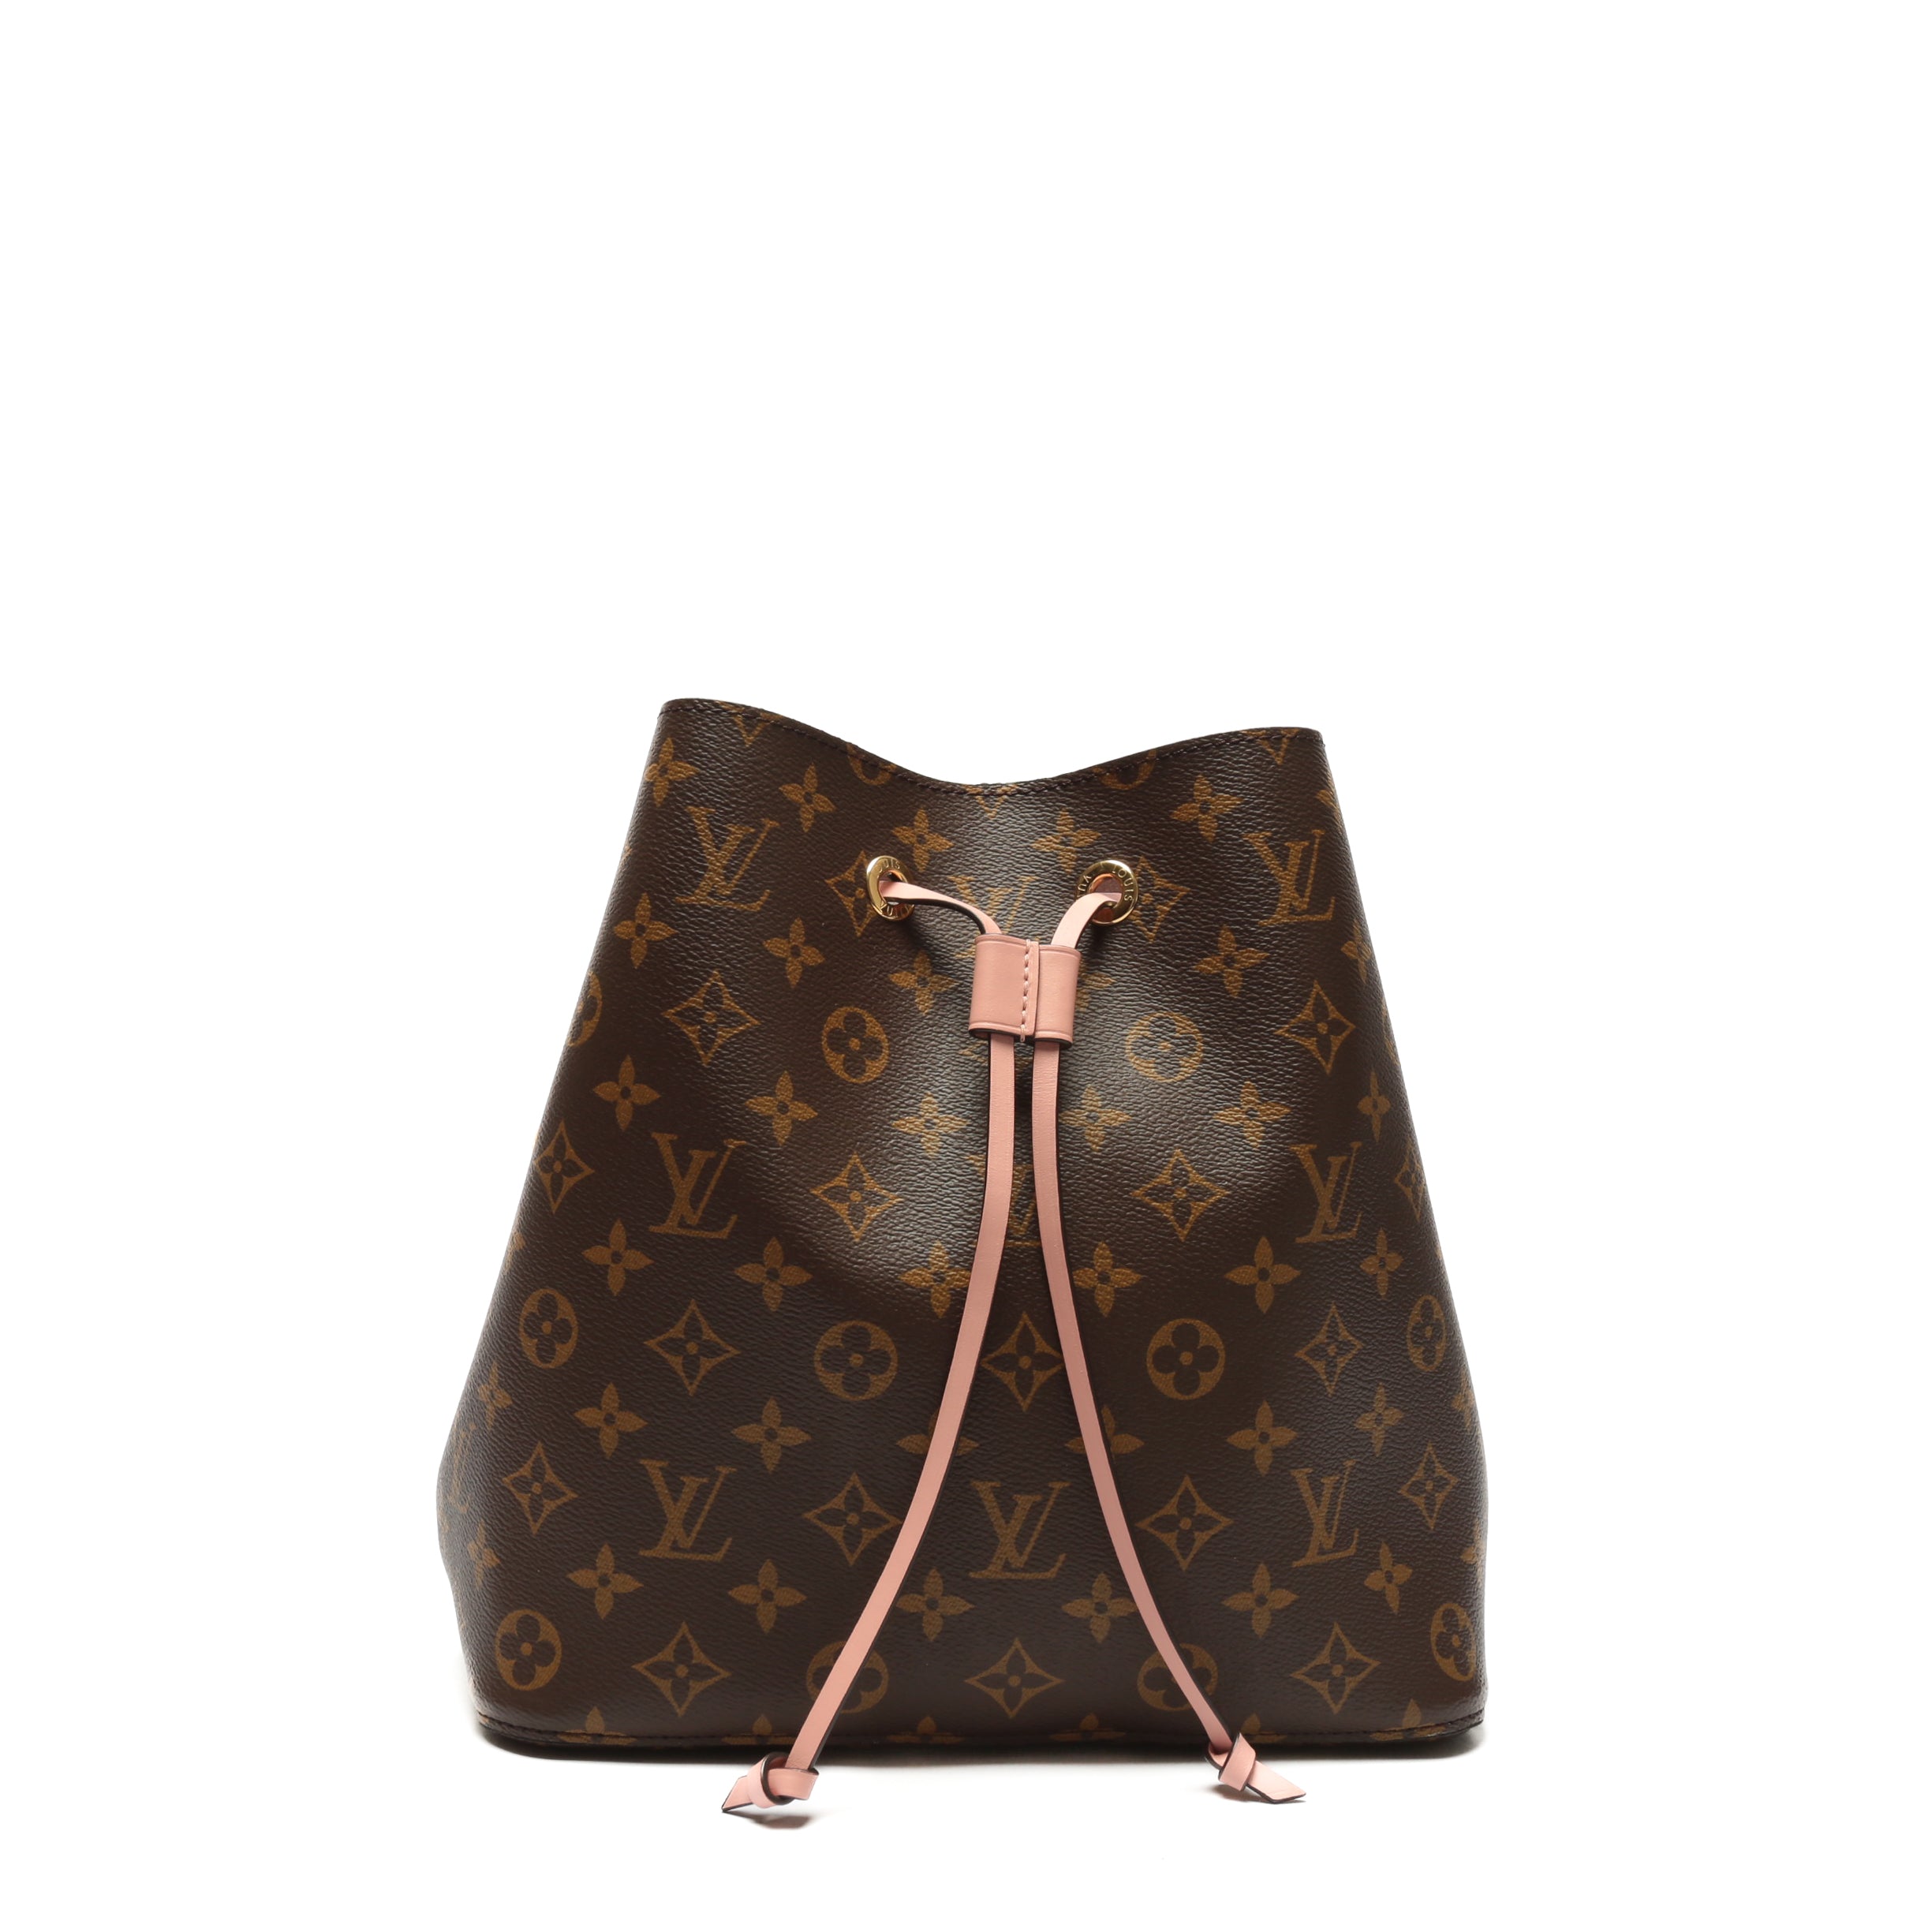 LV NEONOE: FULL REVIEW AND HOW TO ACCESSORIZE. A Bag with Lots of Options 